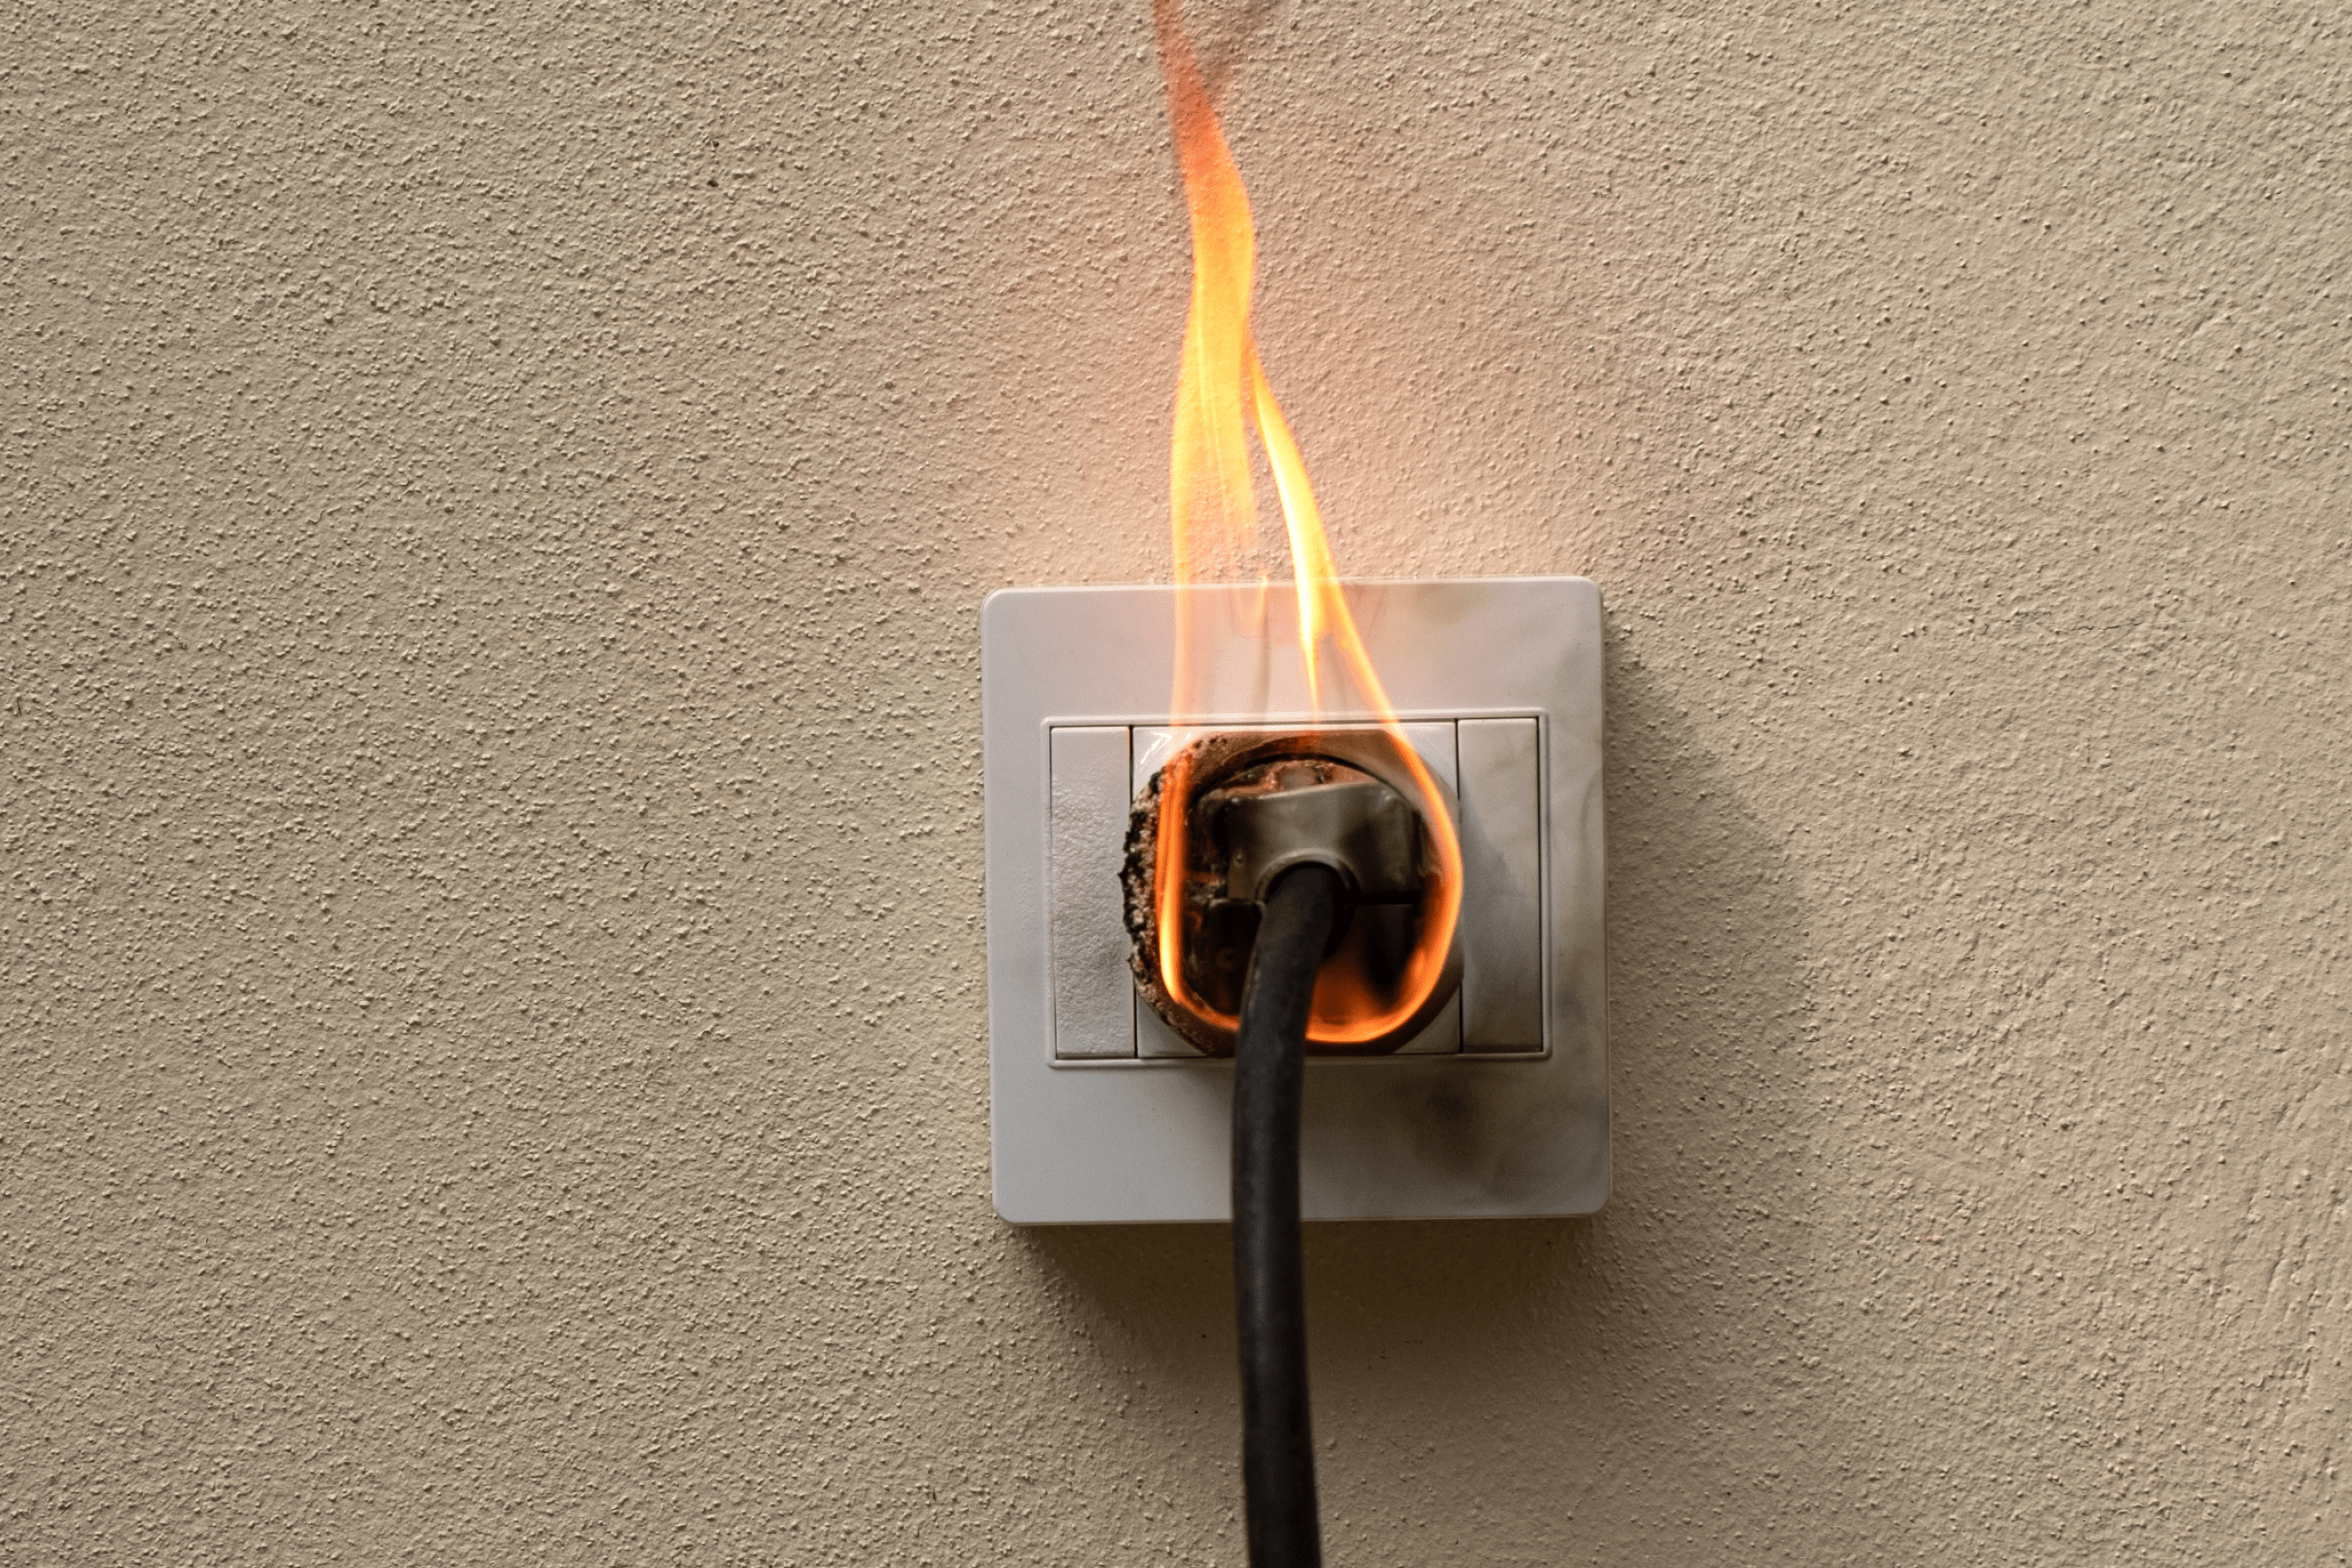 Electric wire plug on fire